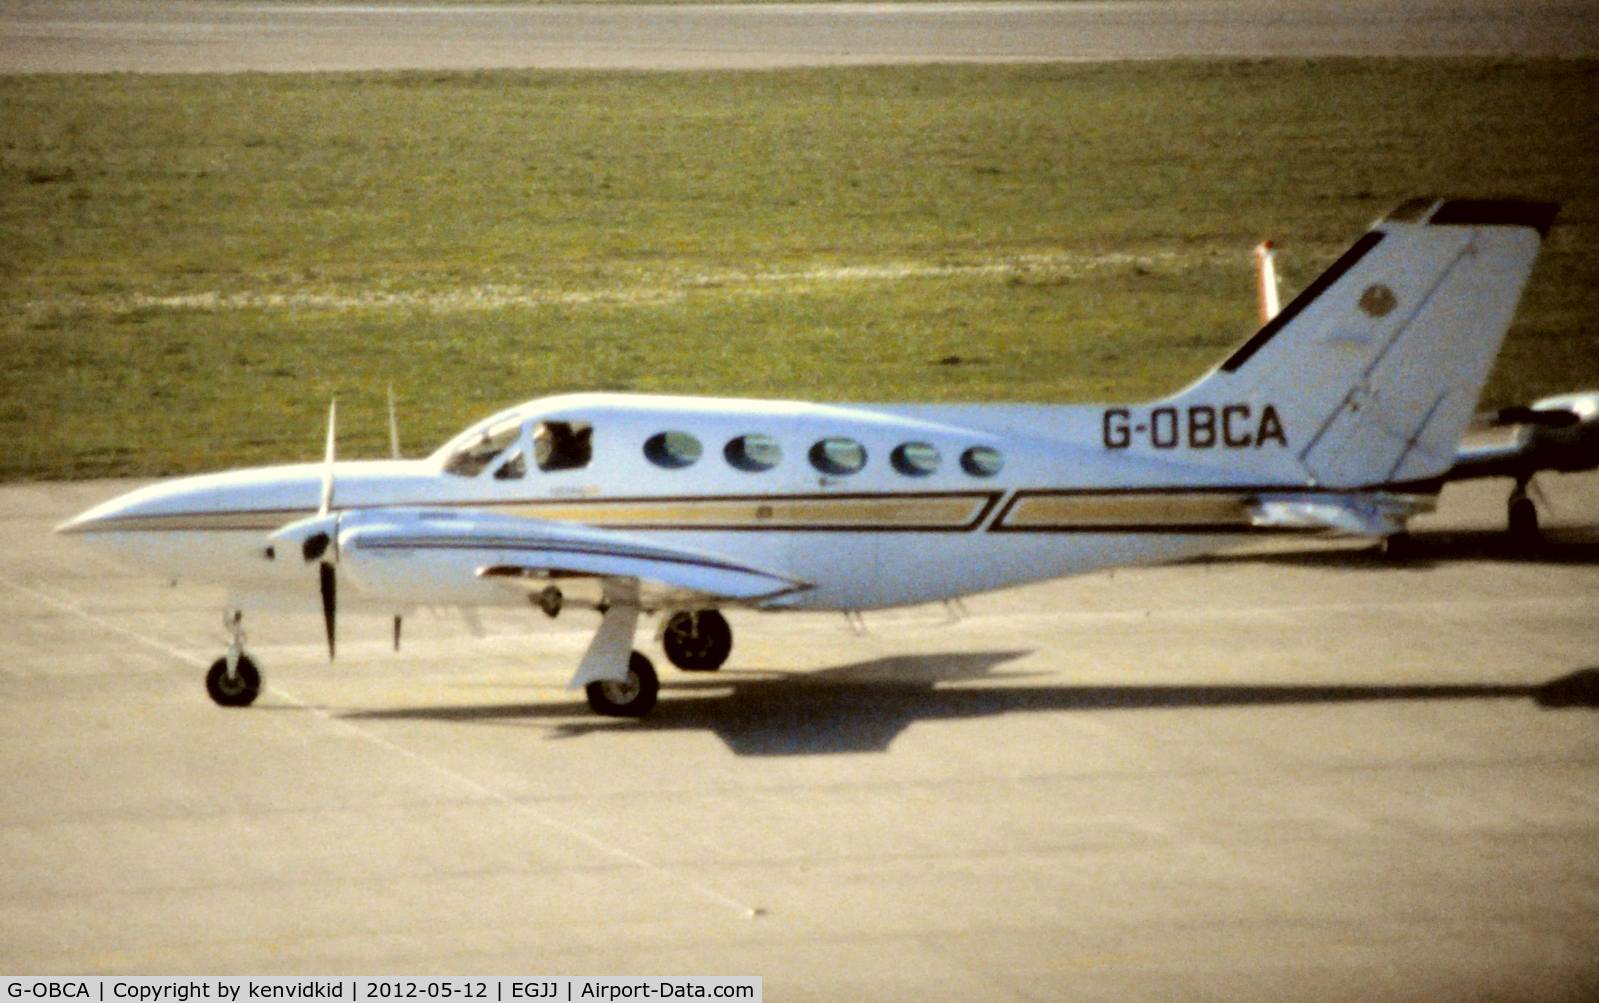 G-OBCA, 1978 Cessna 421C Golden Eagle C/N 421C0471, At Jersey airport early 1970's.
Scanned from slide.